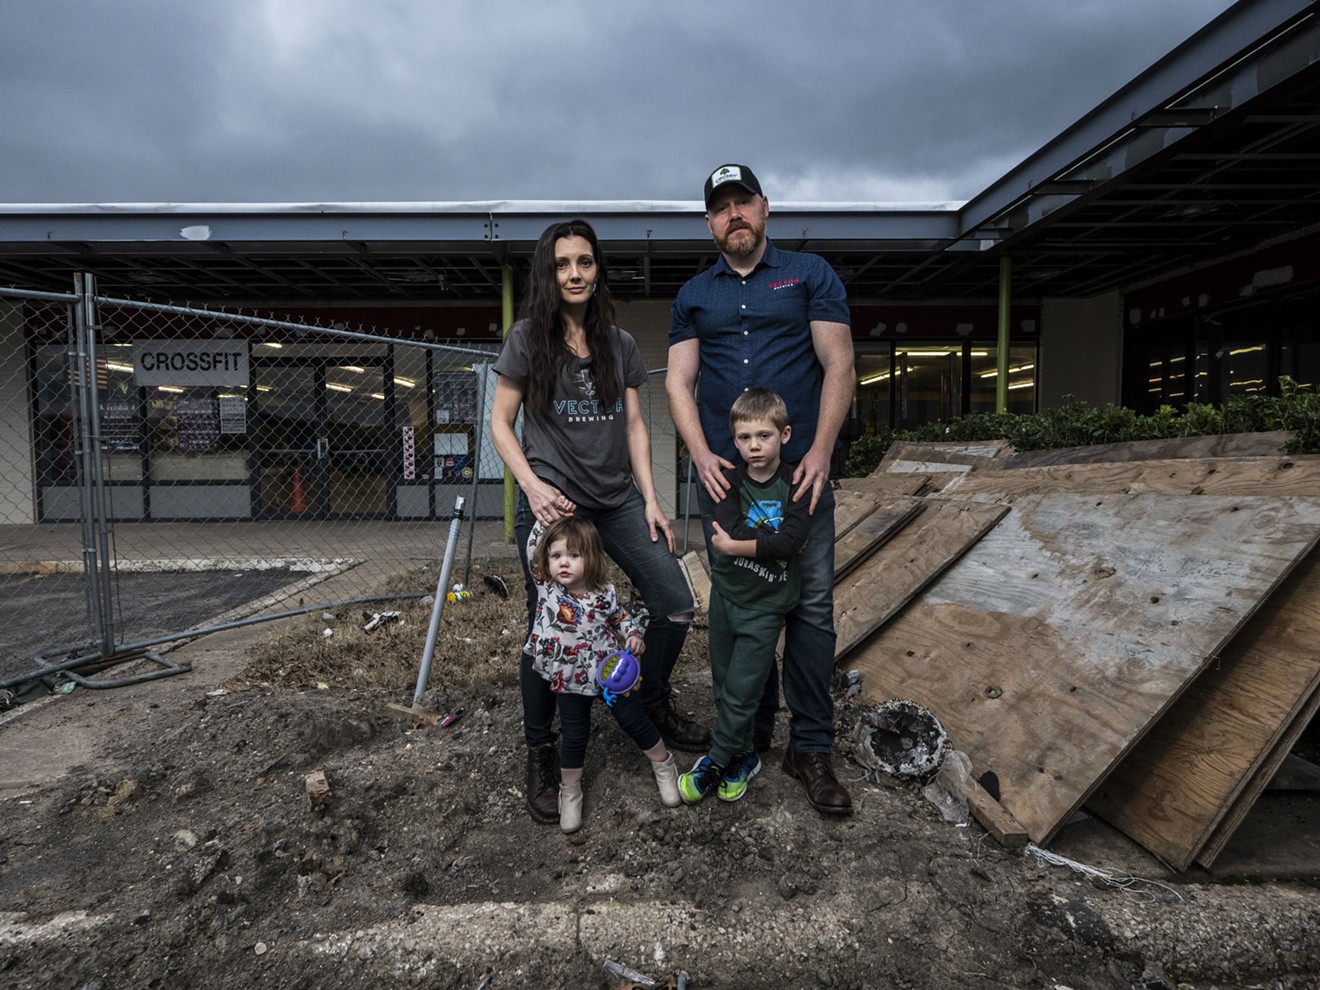 Veronica and Craig Bradley and their children signed a lease for their new Lake Highlands Brewpub, Vector Brewing, on Dec. 6. The federal government shutdown began Dec. 20. Now, their brewpub's future is in limbo.